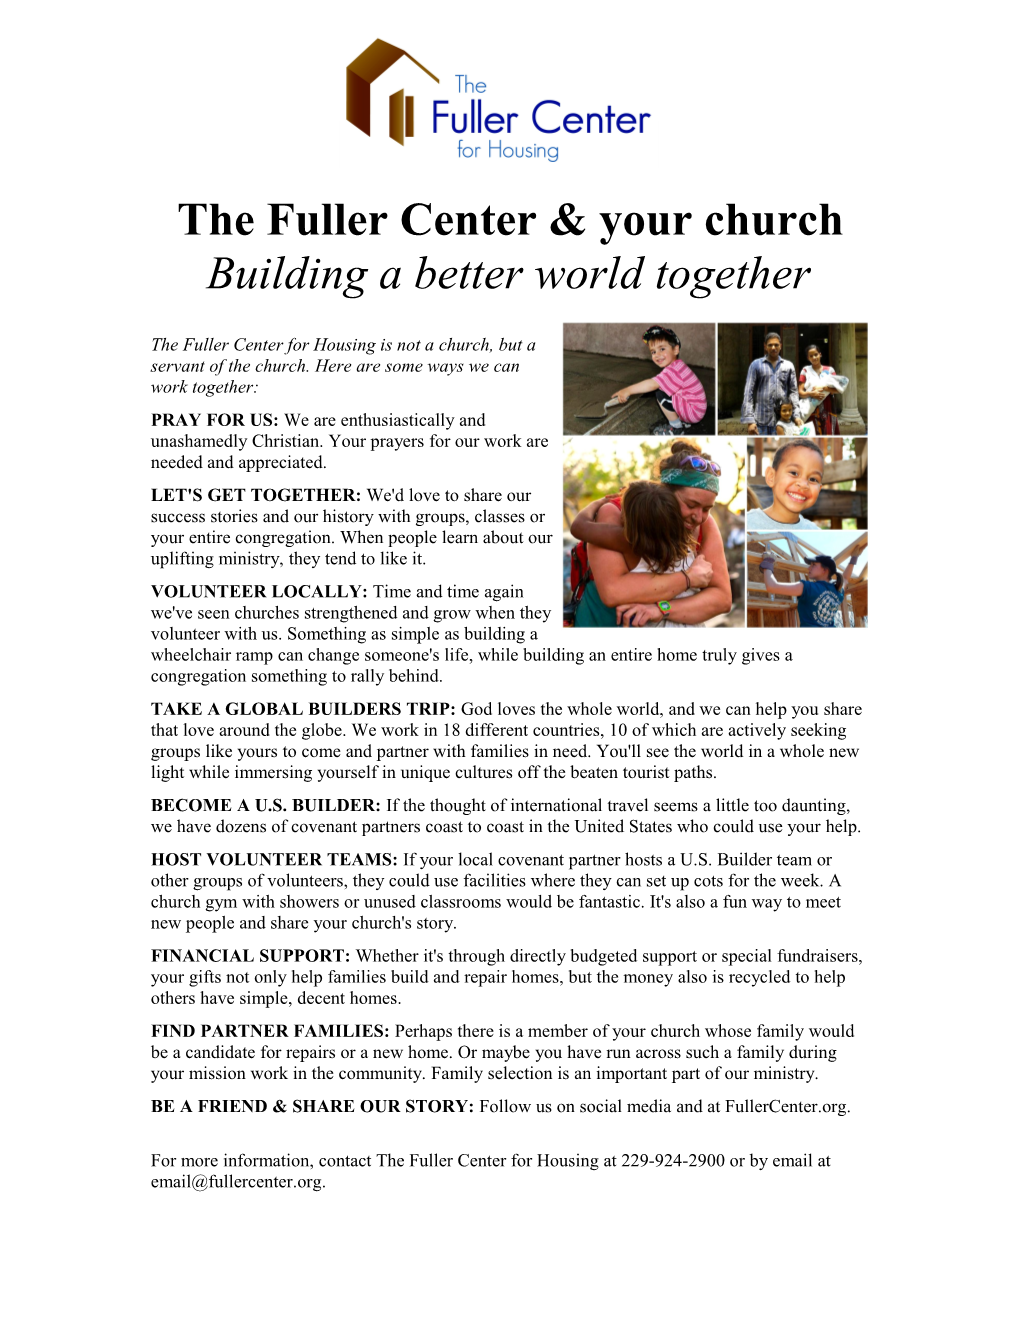 The Fuller Center & Your Church Building a Better World Together